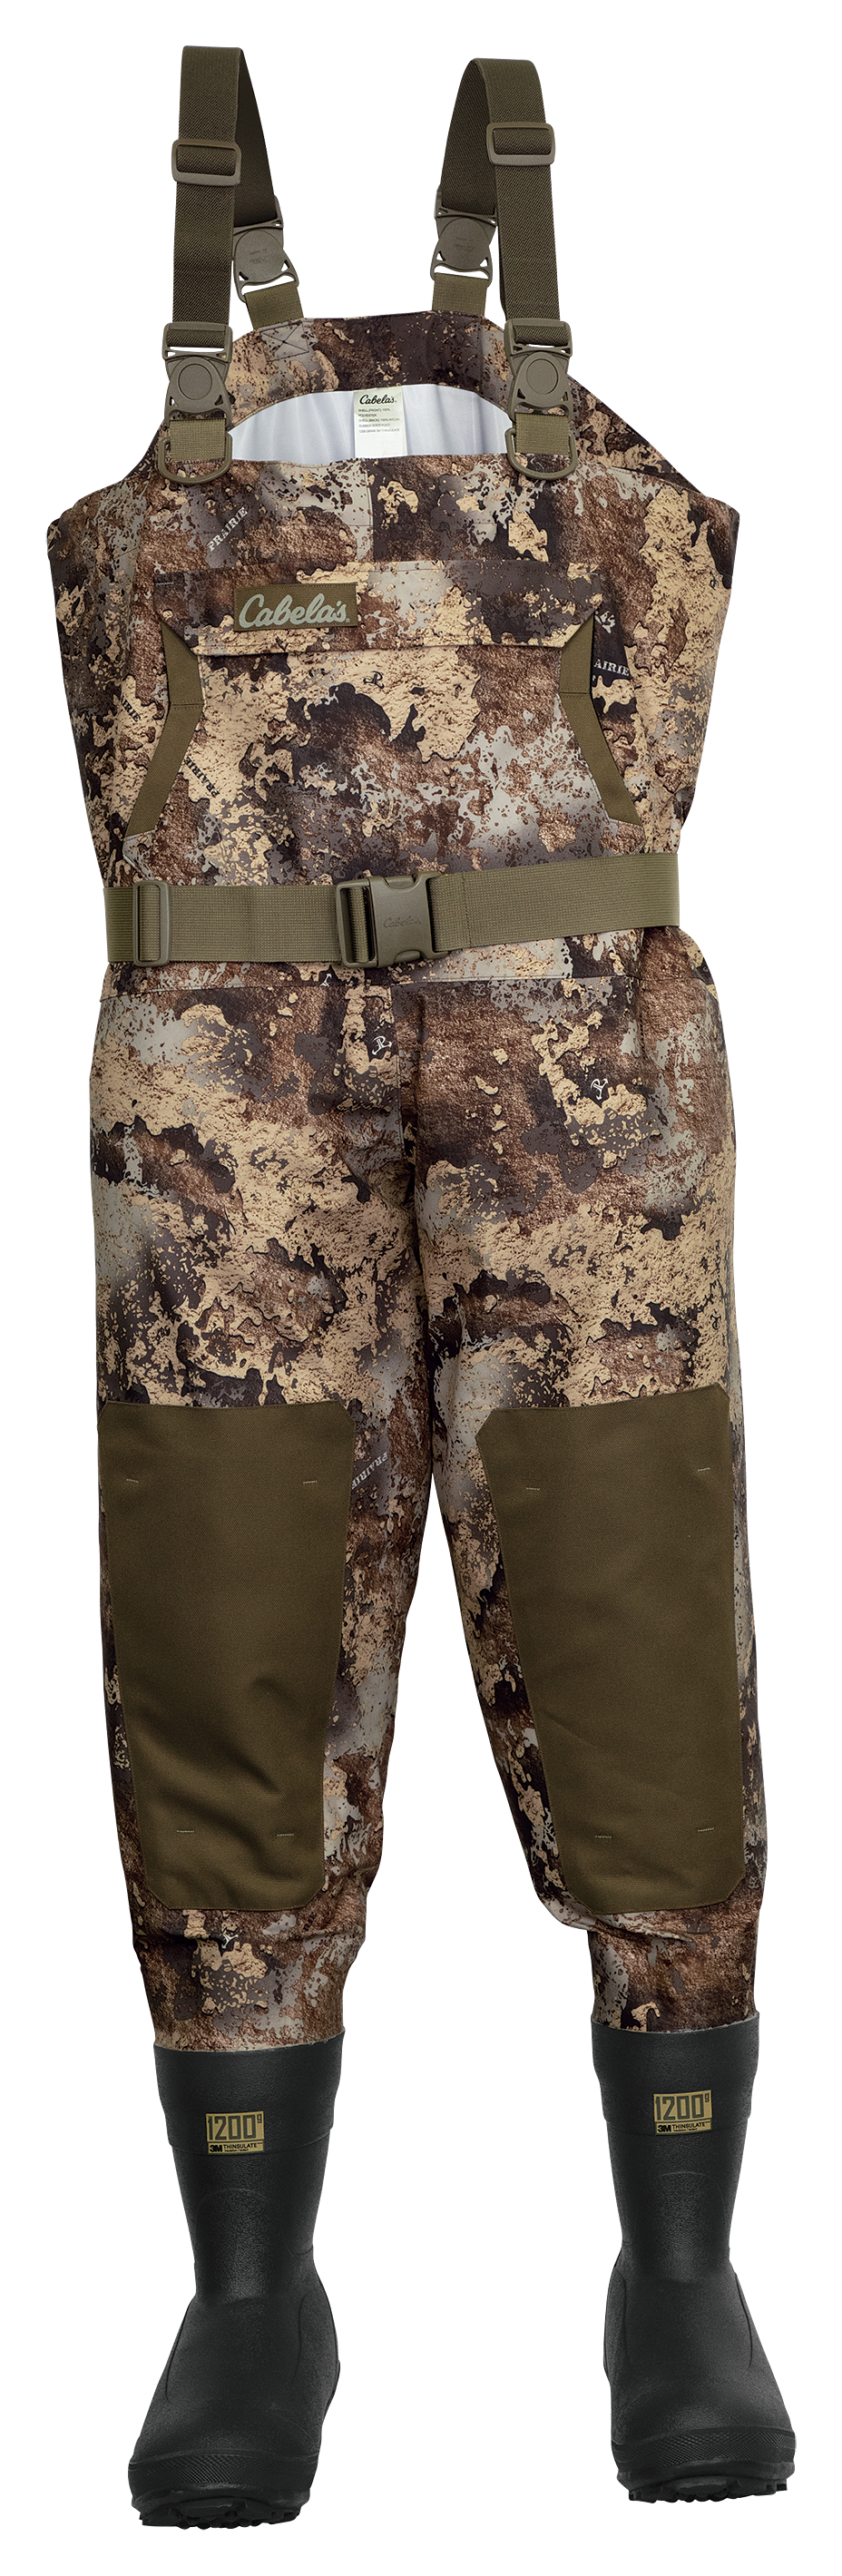 White River Fly Shop Three Forks Lug Sole Chest Waders for Men